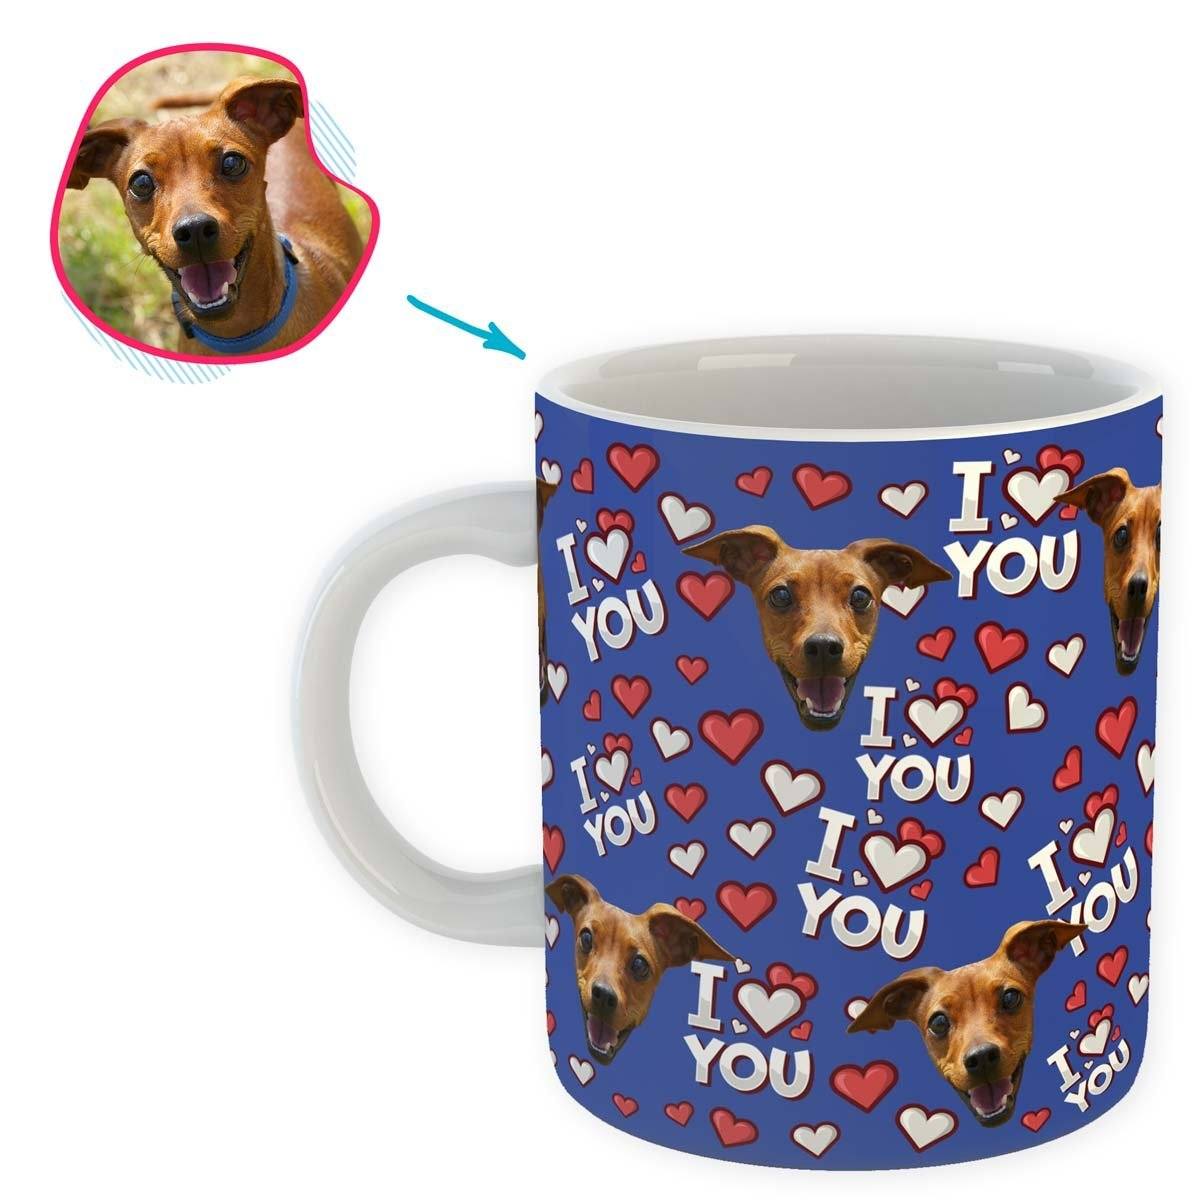 darkblue I Love You mug personalized with photo of face printed on it